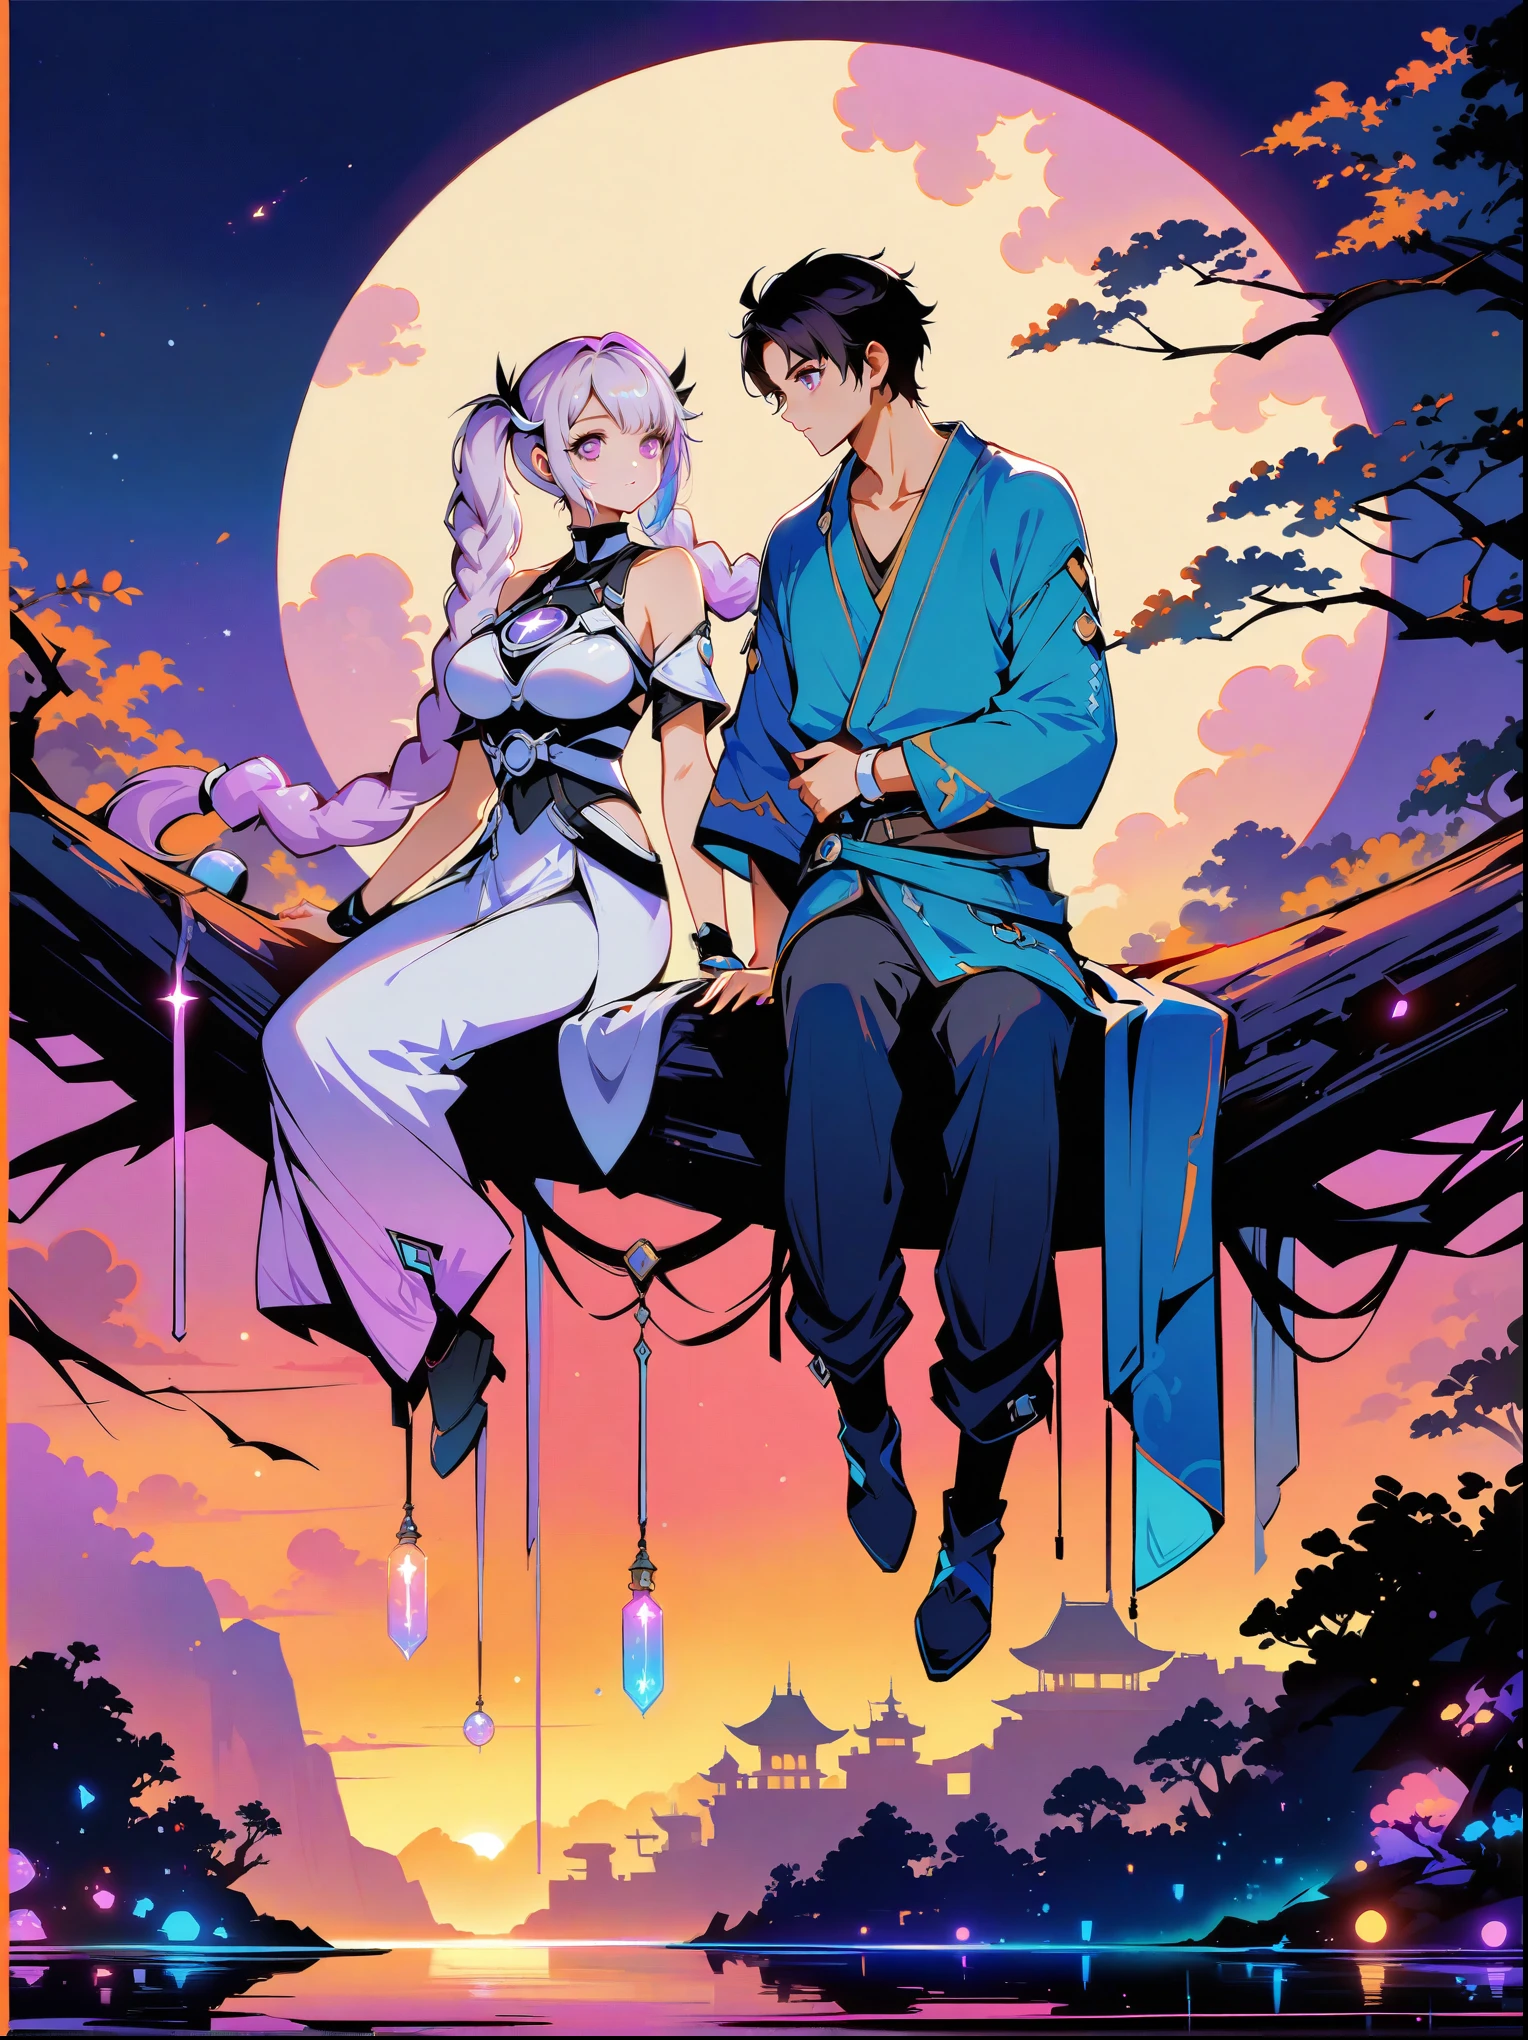 yinji, Romantic ancient style，night，Backlight，A man and a woman sitting on a tree branch，There is a full moon behind，Fresh colors，Soft colors，Diode lamp，Concept art style，Extremely complex details，Clear distinction between light and dark，Structured，Ultra HD, 1yj1